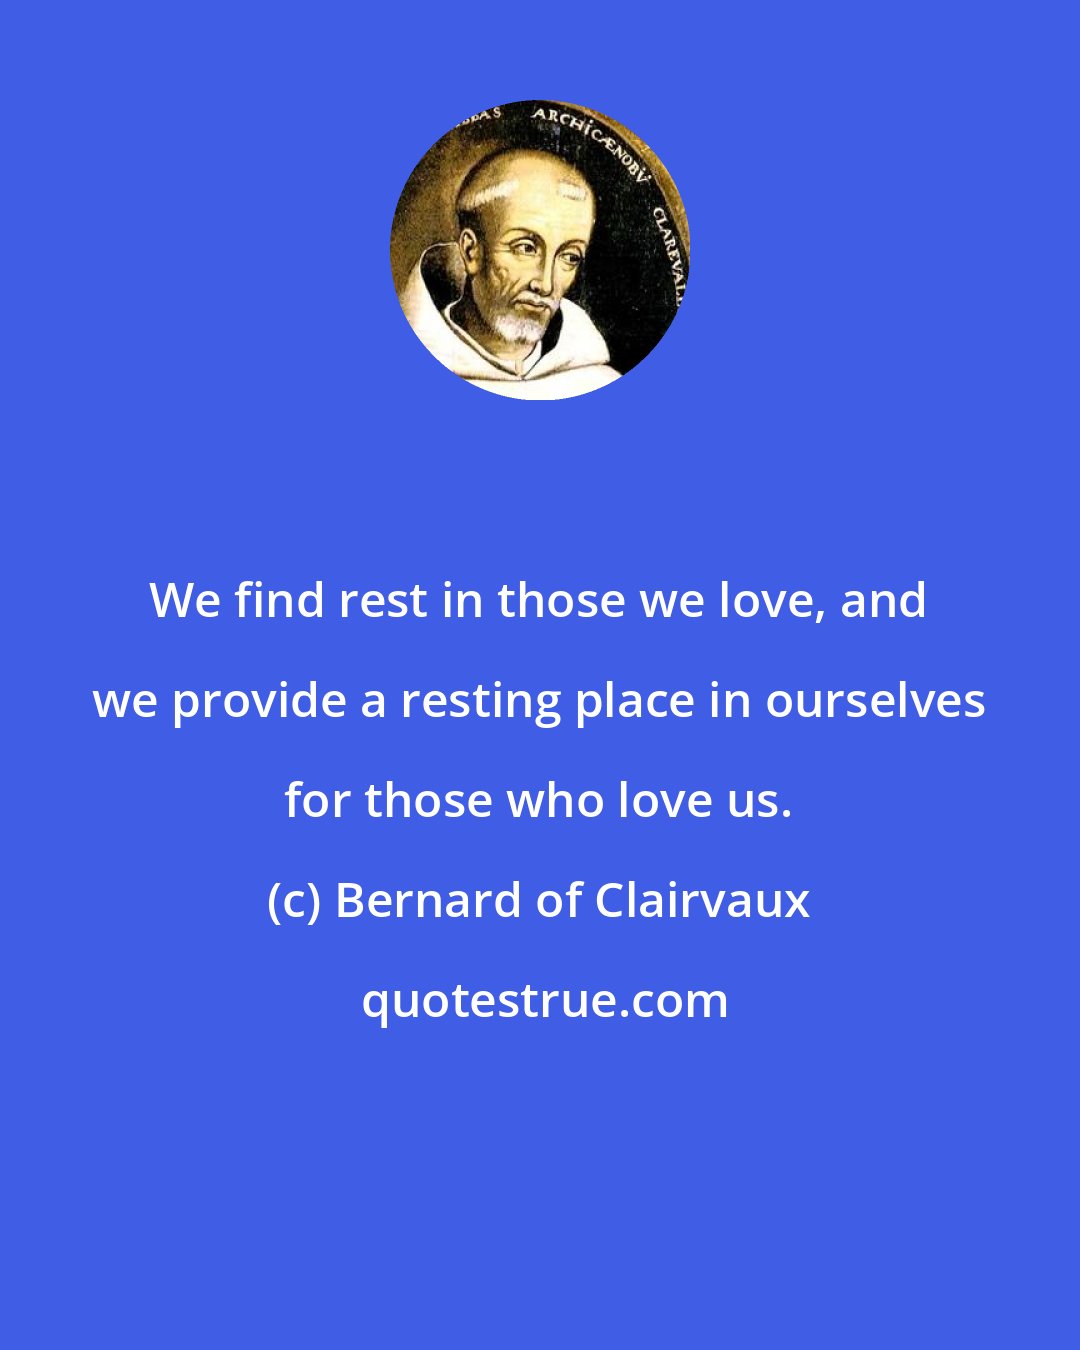 Bernard of Clairvaux: We find rest in those we love, and we provide a resting place in ourselves for those who love us.